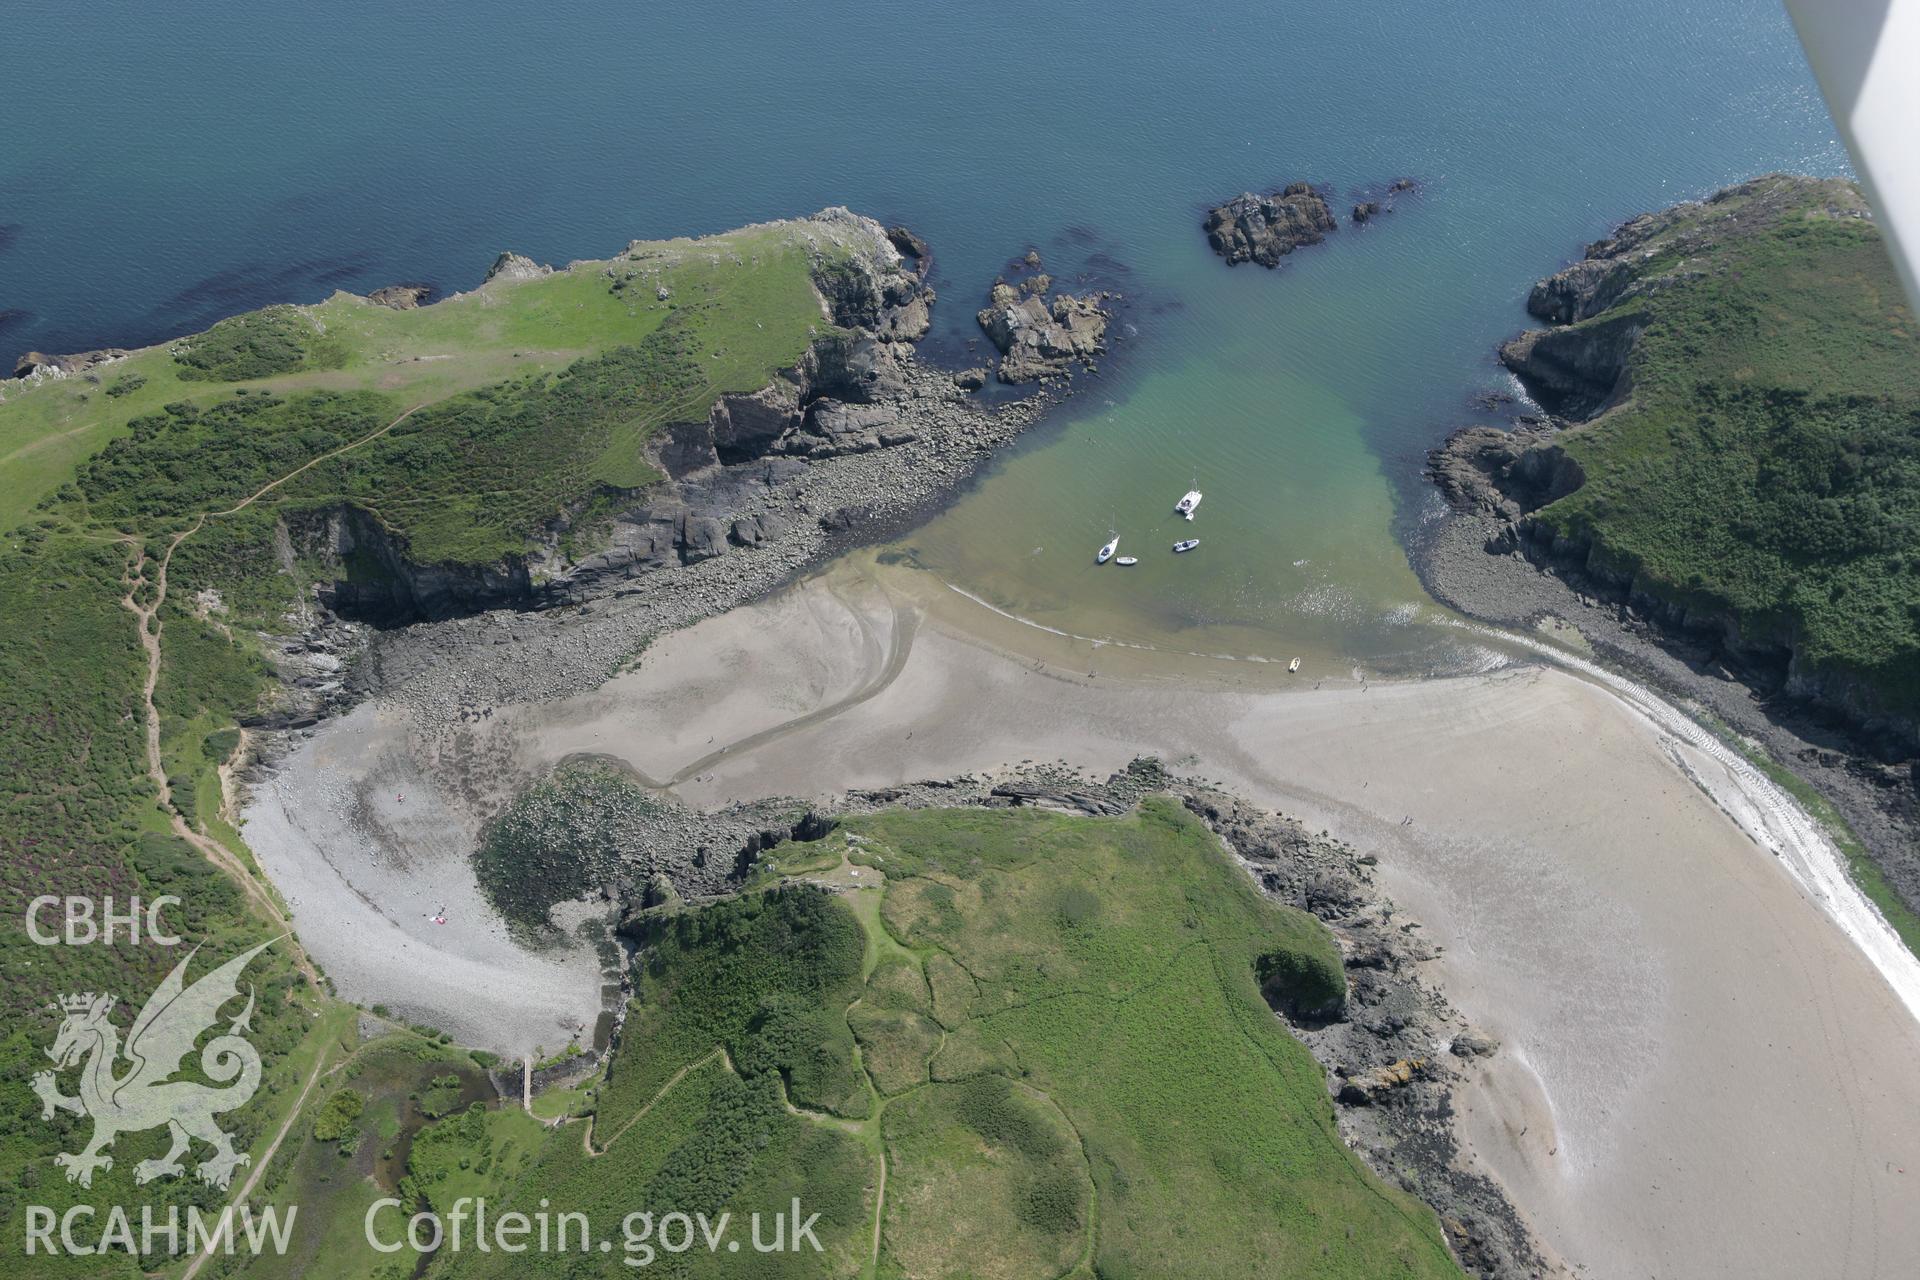 RCAHMW colour oblique photograph of Gribin, promontory fort south of Solva. Taken by Toby Driver on 01/08/2007.